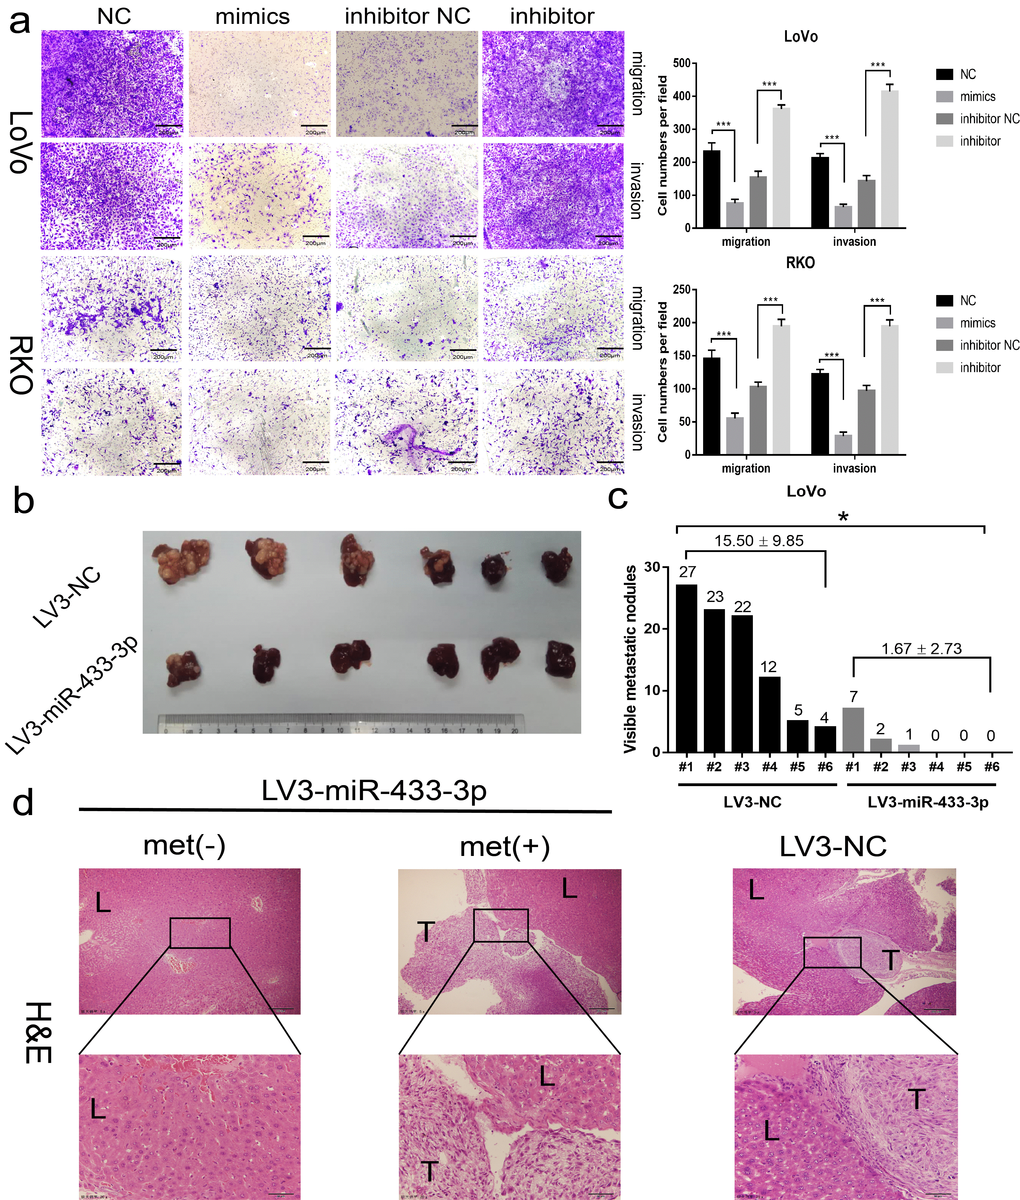 miR-433 attenuated the invasion and metastasis properties in CRC. (a) Transwell assays showed that restoration or downregulation of miR-433 by transfection of the mimics or inhibitor of miR-433 remarkably rescinded or reinforced the migration and invasion phenotype in LoVo and RKO cells (NC, negative control; mimics, miR-433 mimics; inhibitor NC, negative control for inhibitor; inhibitor, inhibitor of miR-433). (b) Four weeks after intra-splenic injection of LoVo/LV3-miR-433-3p and LoVo/LV3-NC cells, the livers of the two group mice were collected and photographed. (c) Corresponding visible metastatic nodules in the two groups showed that LV3-miR-433-3p conspicuously abolished the metastasis activity of LoVo cells. (d) H&E-stained livers with or without metastases were imaged (met(-), negatively metastatic mouse livers; met(+), positively metastatic mouse livers; T, metastatic tumor; L, liver). *, pp